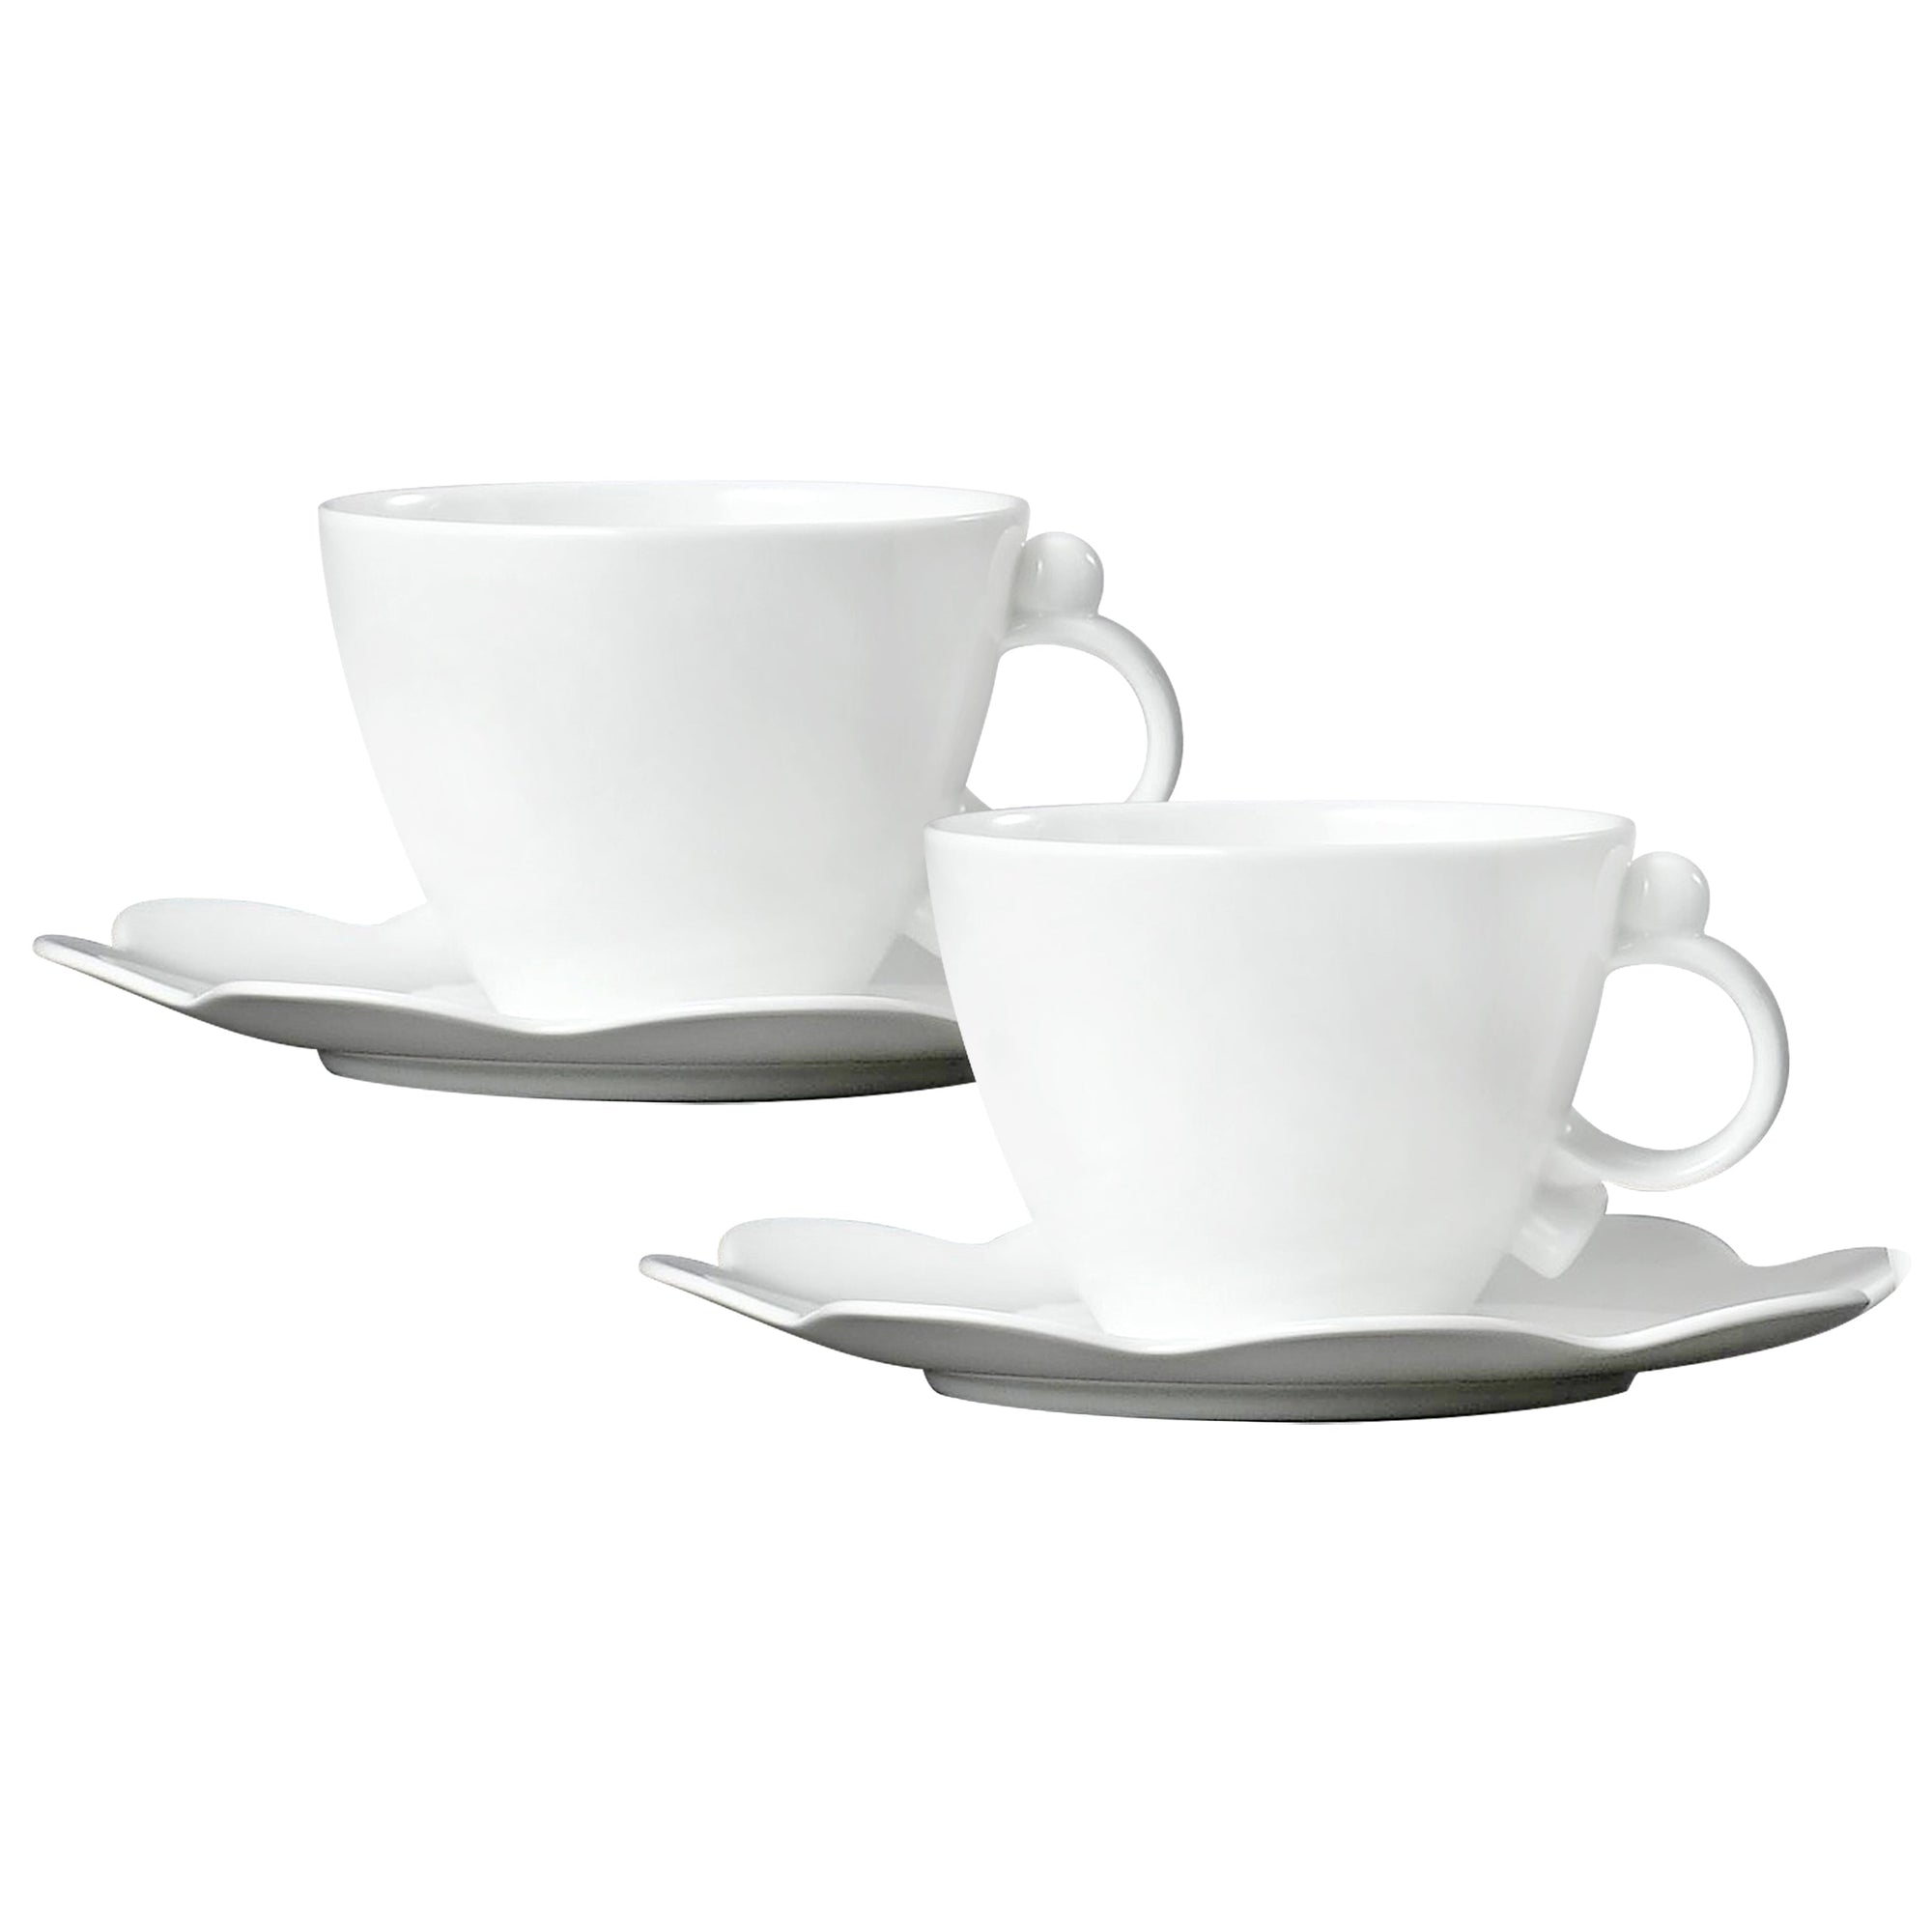 Prouna Cup & Saucer in White Set of 2 White Background Photo